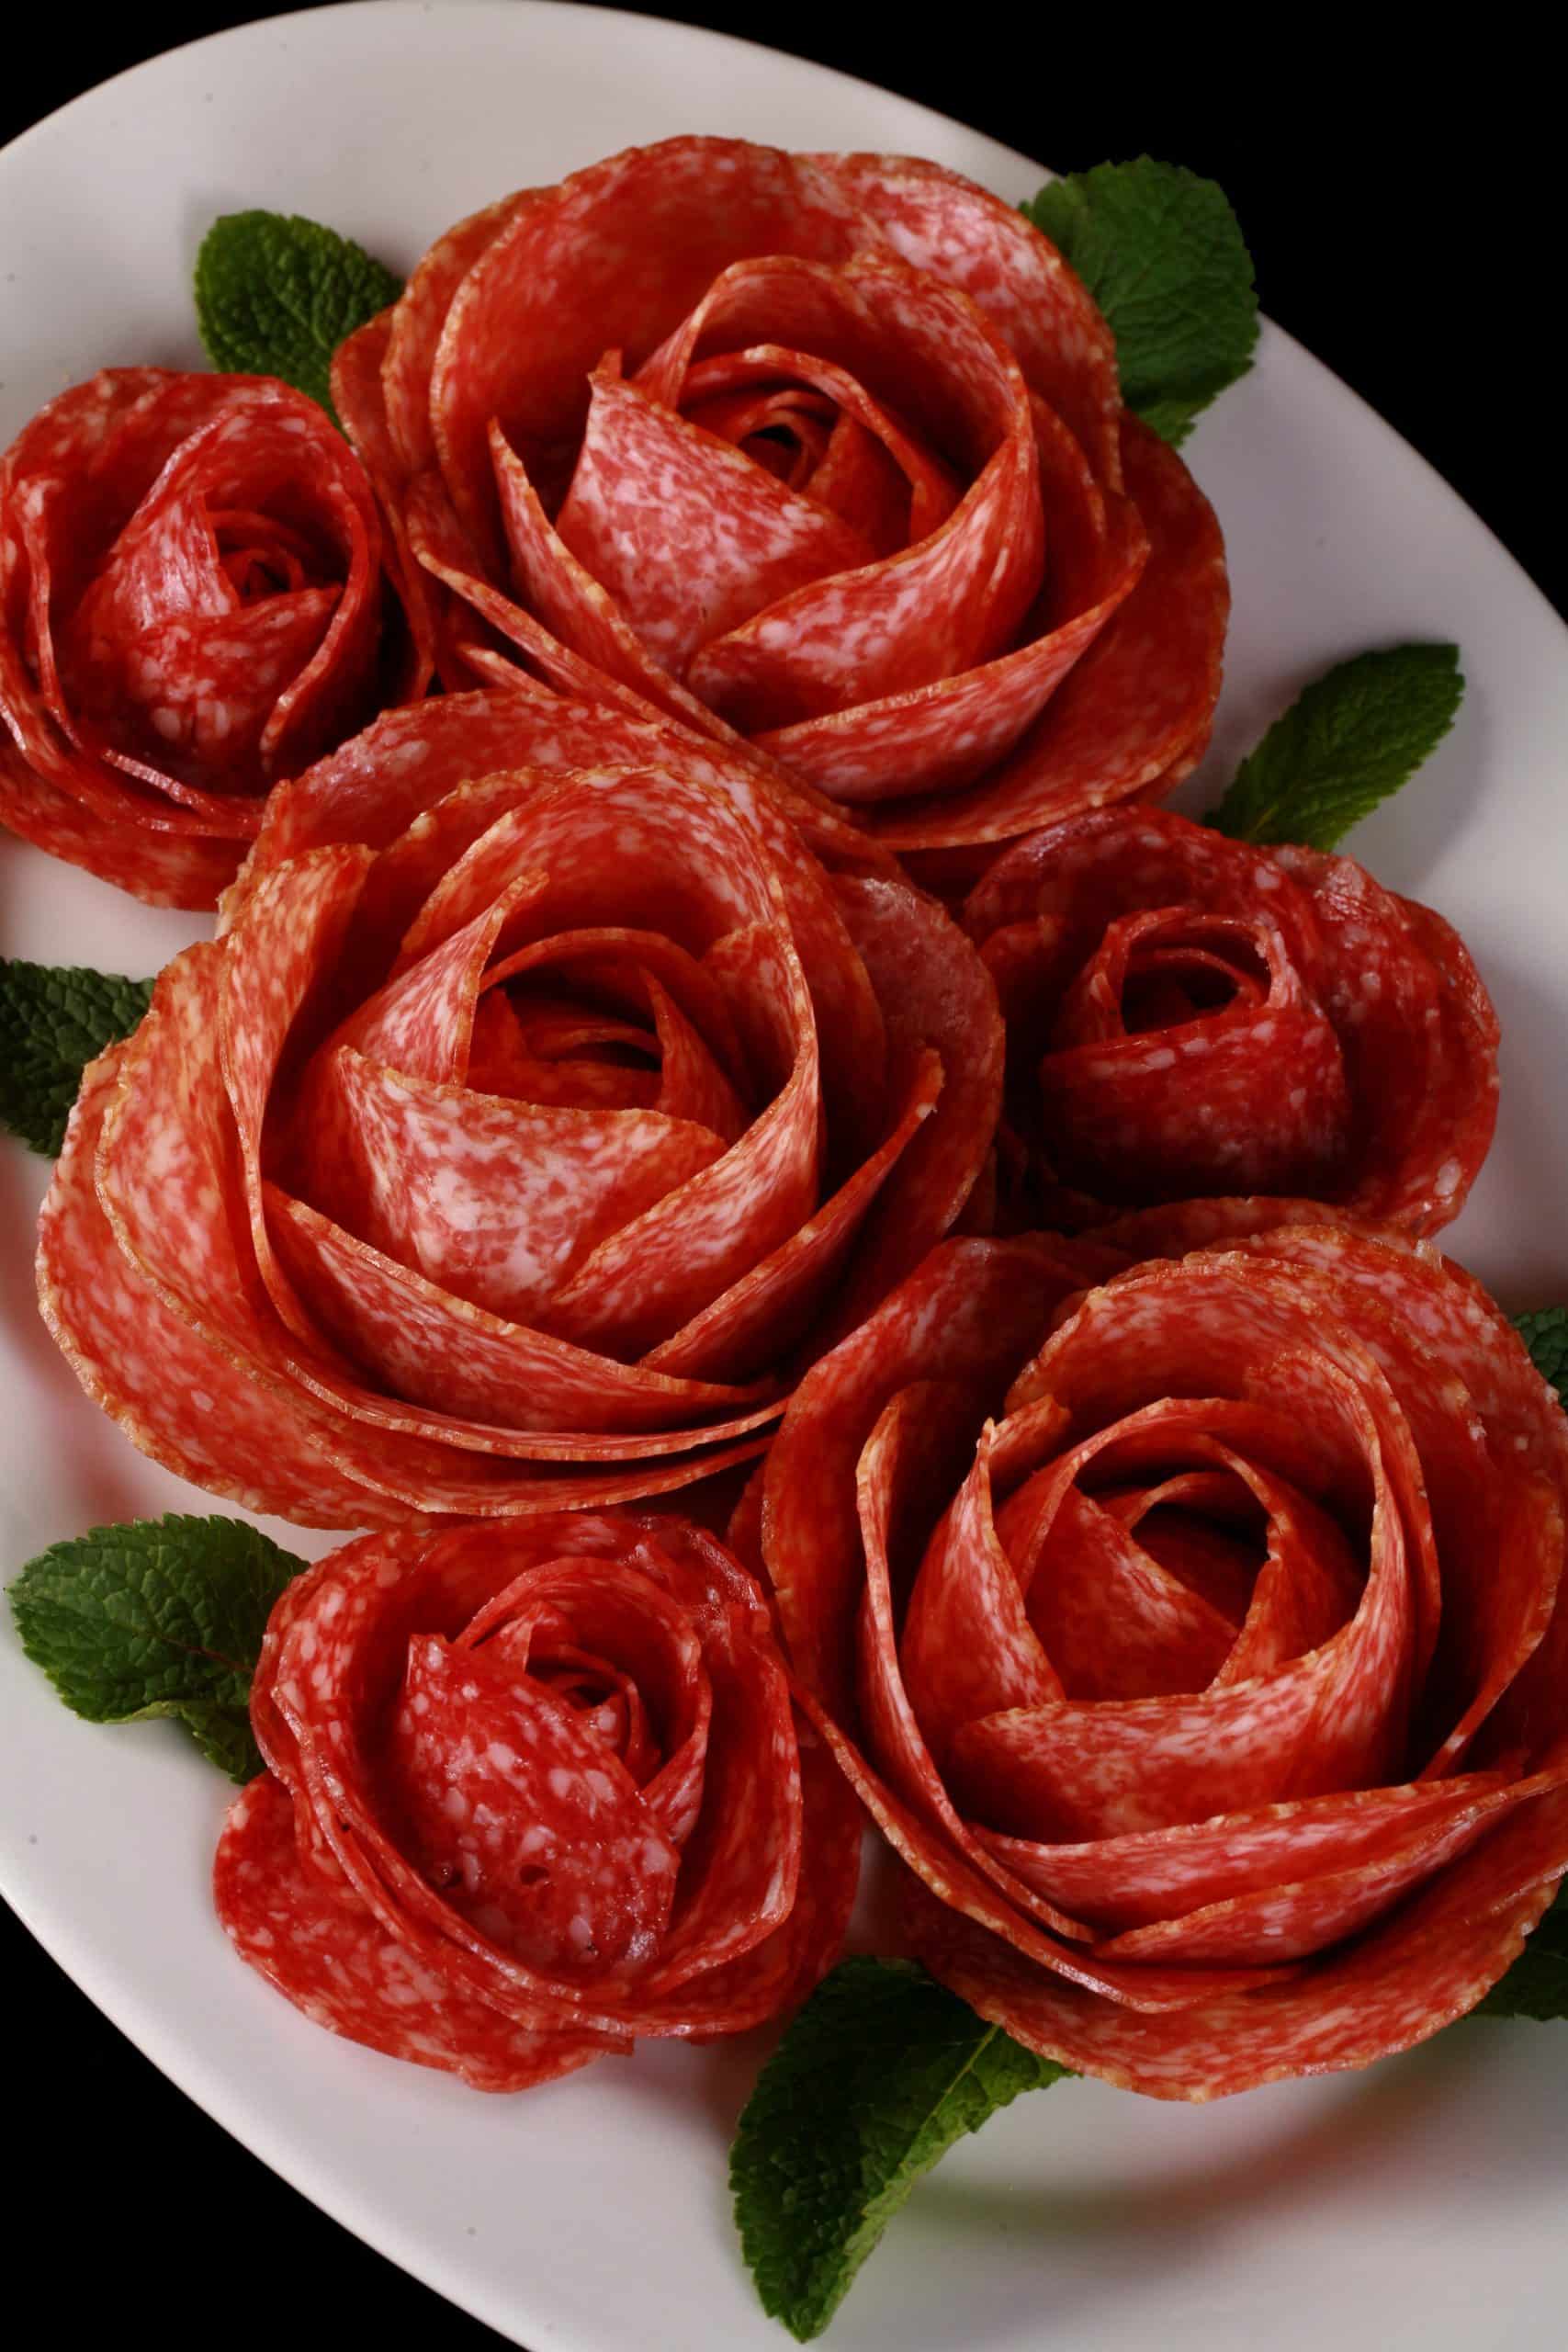 A plate of large and small charcuterie roses, accented with mint leaves.